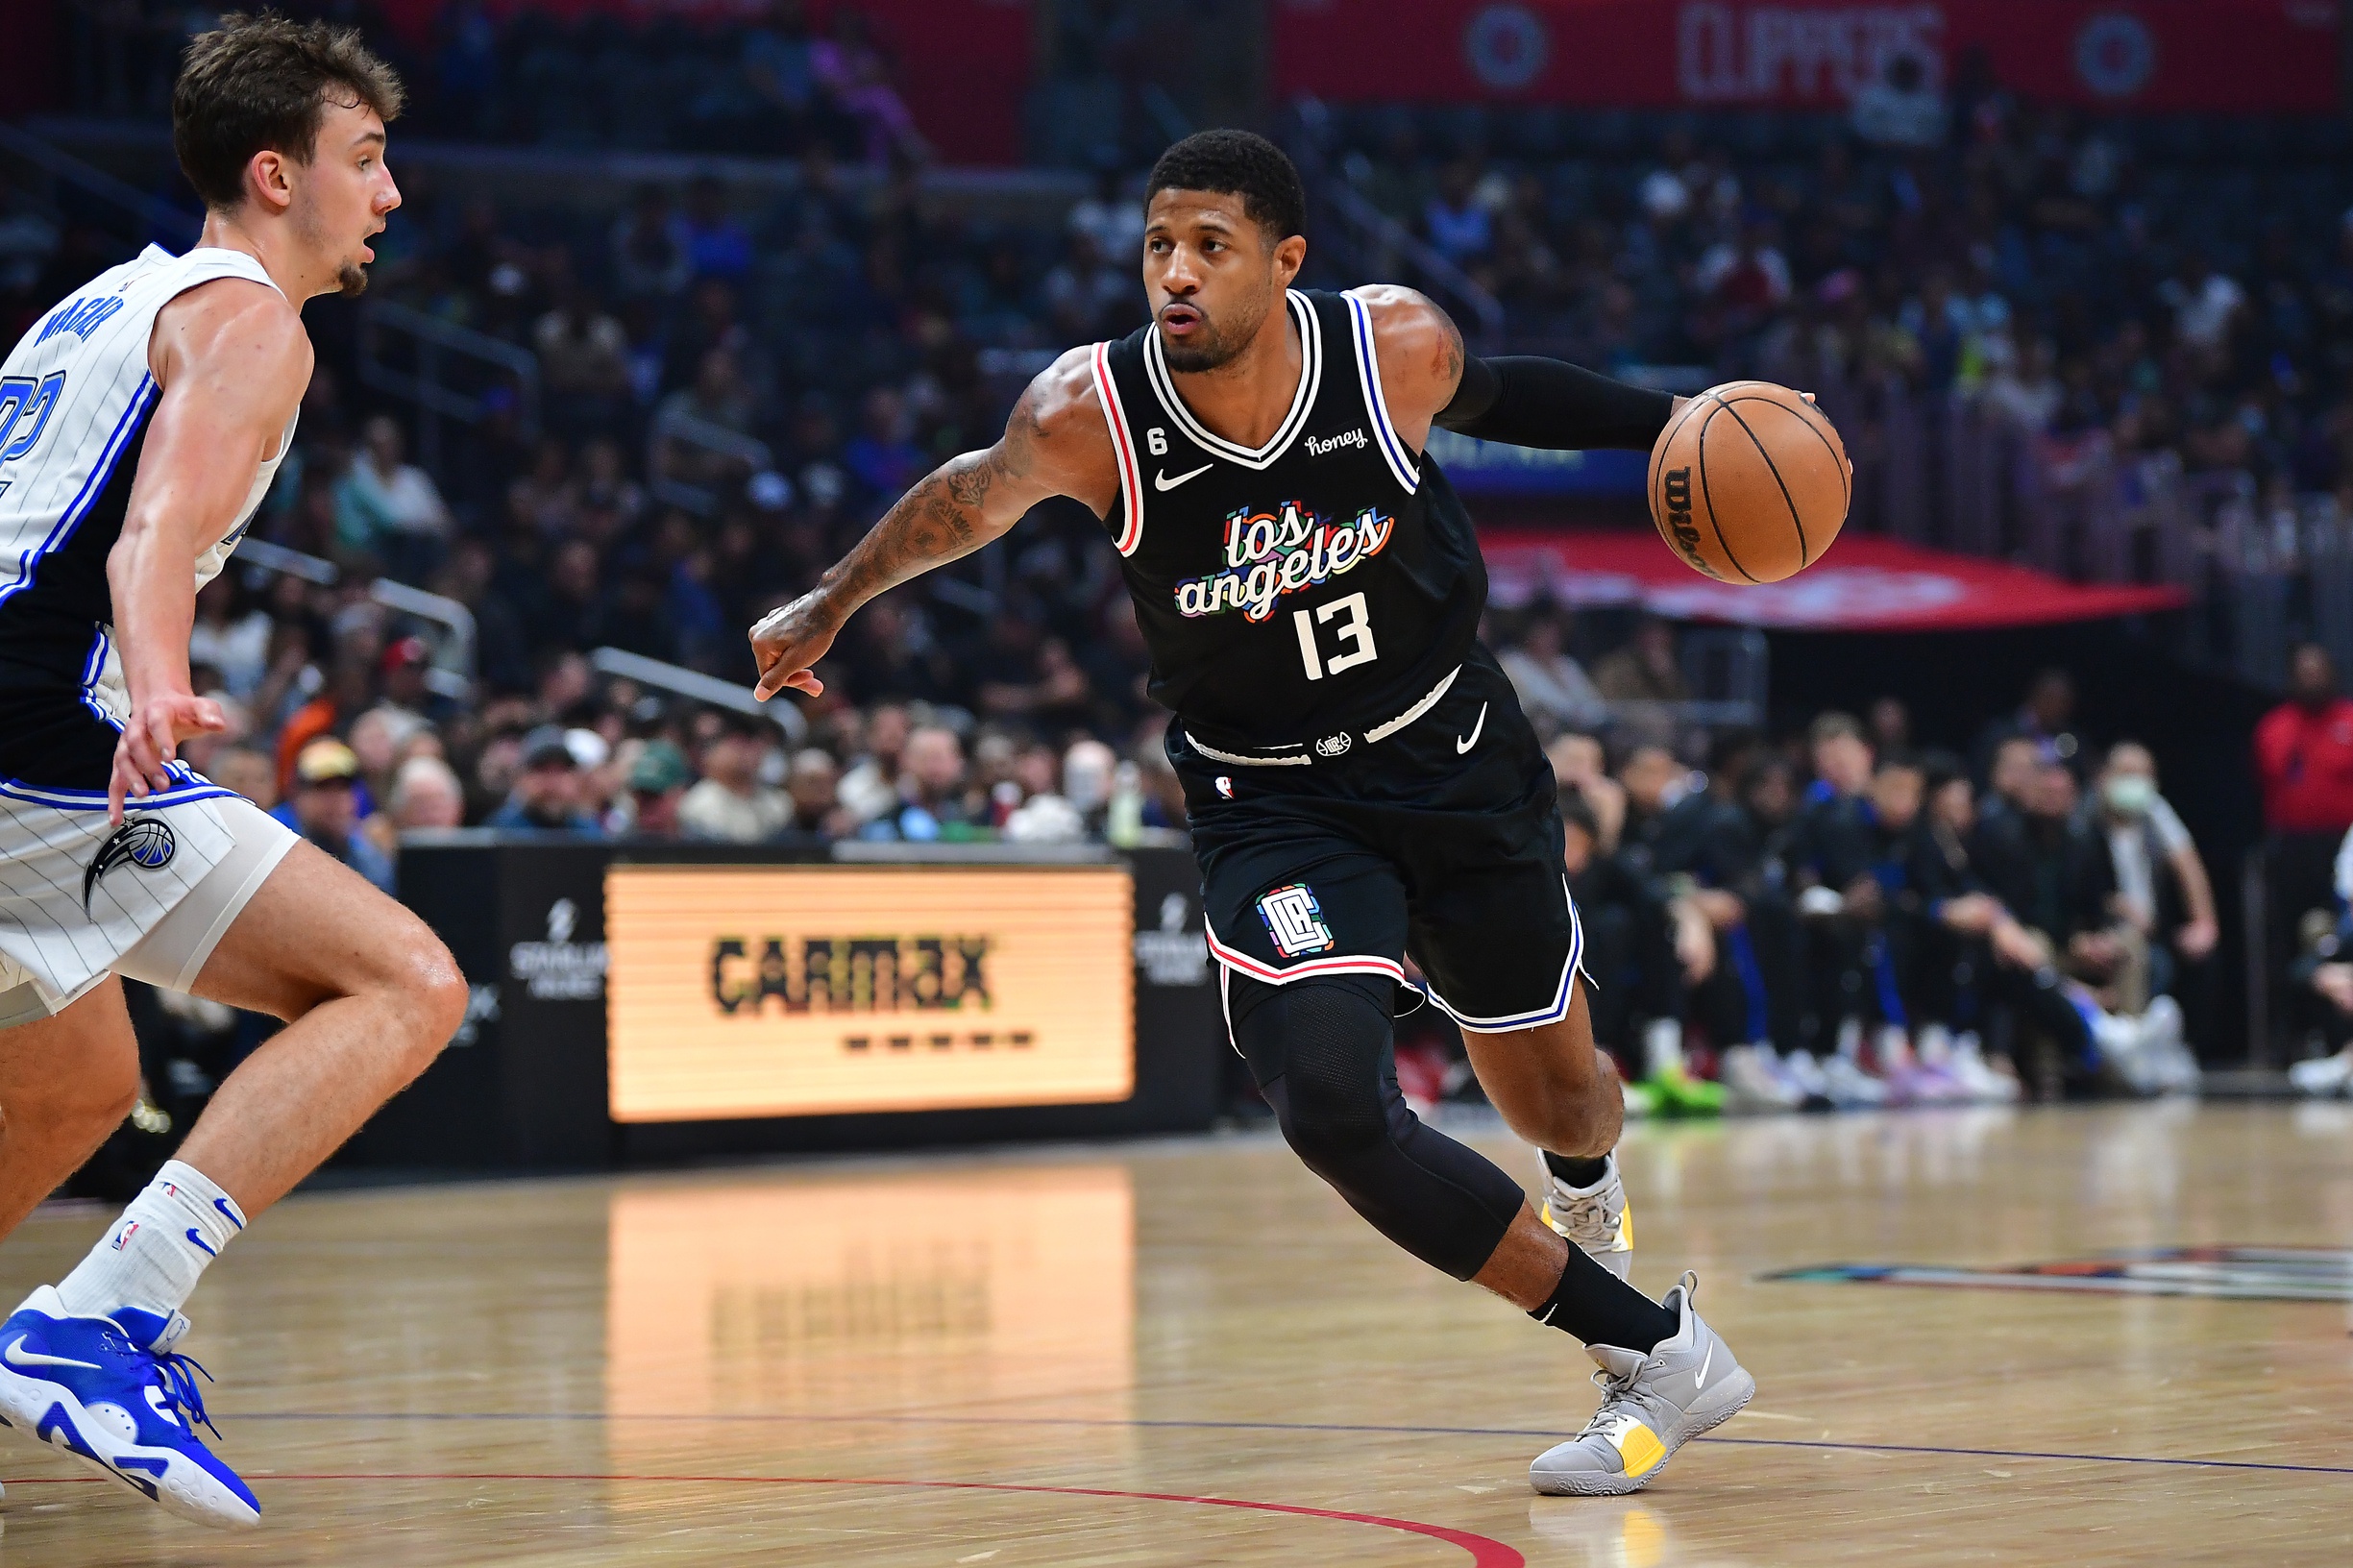 Mar 18, 2023; Los Angeles, California, USA; Los Angeles Clippers forward Paul George (13) moves to the basket against Orlando Magic forward Franz Wagner (22) during the first half at Crypto.com Arena. Mandatory Credit: Gary A. Vasquez-USA TODAY Sports